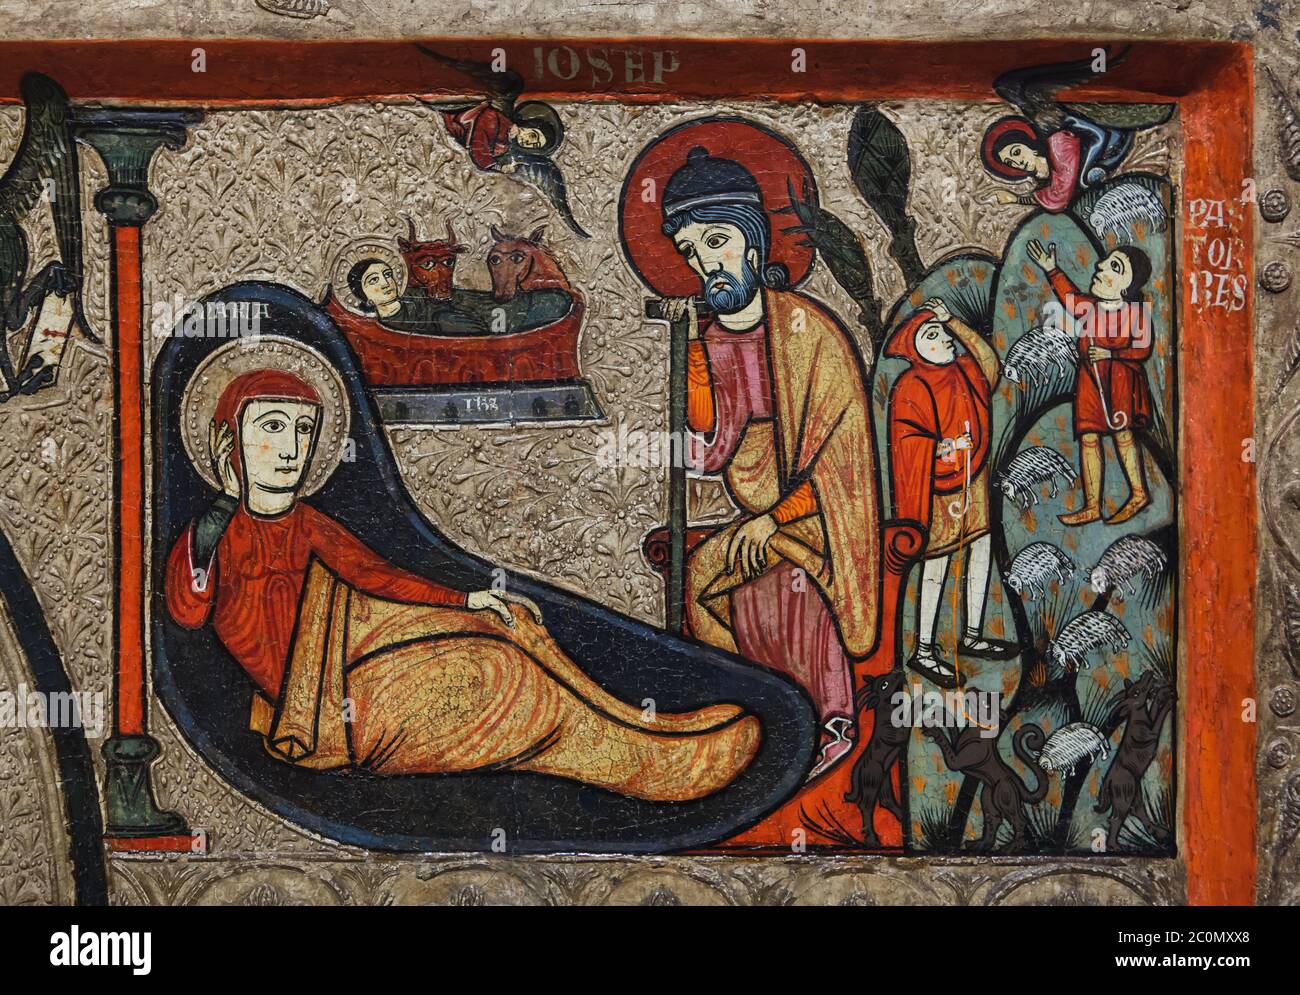 Nativity scene (L) and the Annunciation of the Shepherds (R) depicted in the Romanesque antependium (altar frontal), known as the Antependium from Cardet dated from the second half of the 13th century originally from the church of Santa Maria de Cardet in the area of Vall de Boí in Alta Ribagorça in Catalonia, Spain, now on display in the National Art Museum of Catalonia (Museu Nacional d'Art de Catalunya) in Barcelona, Catalonia, Spain. Stock Photo